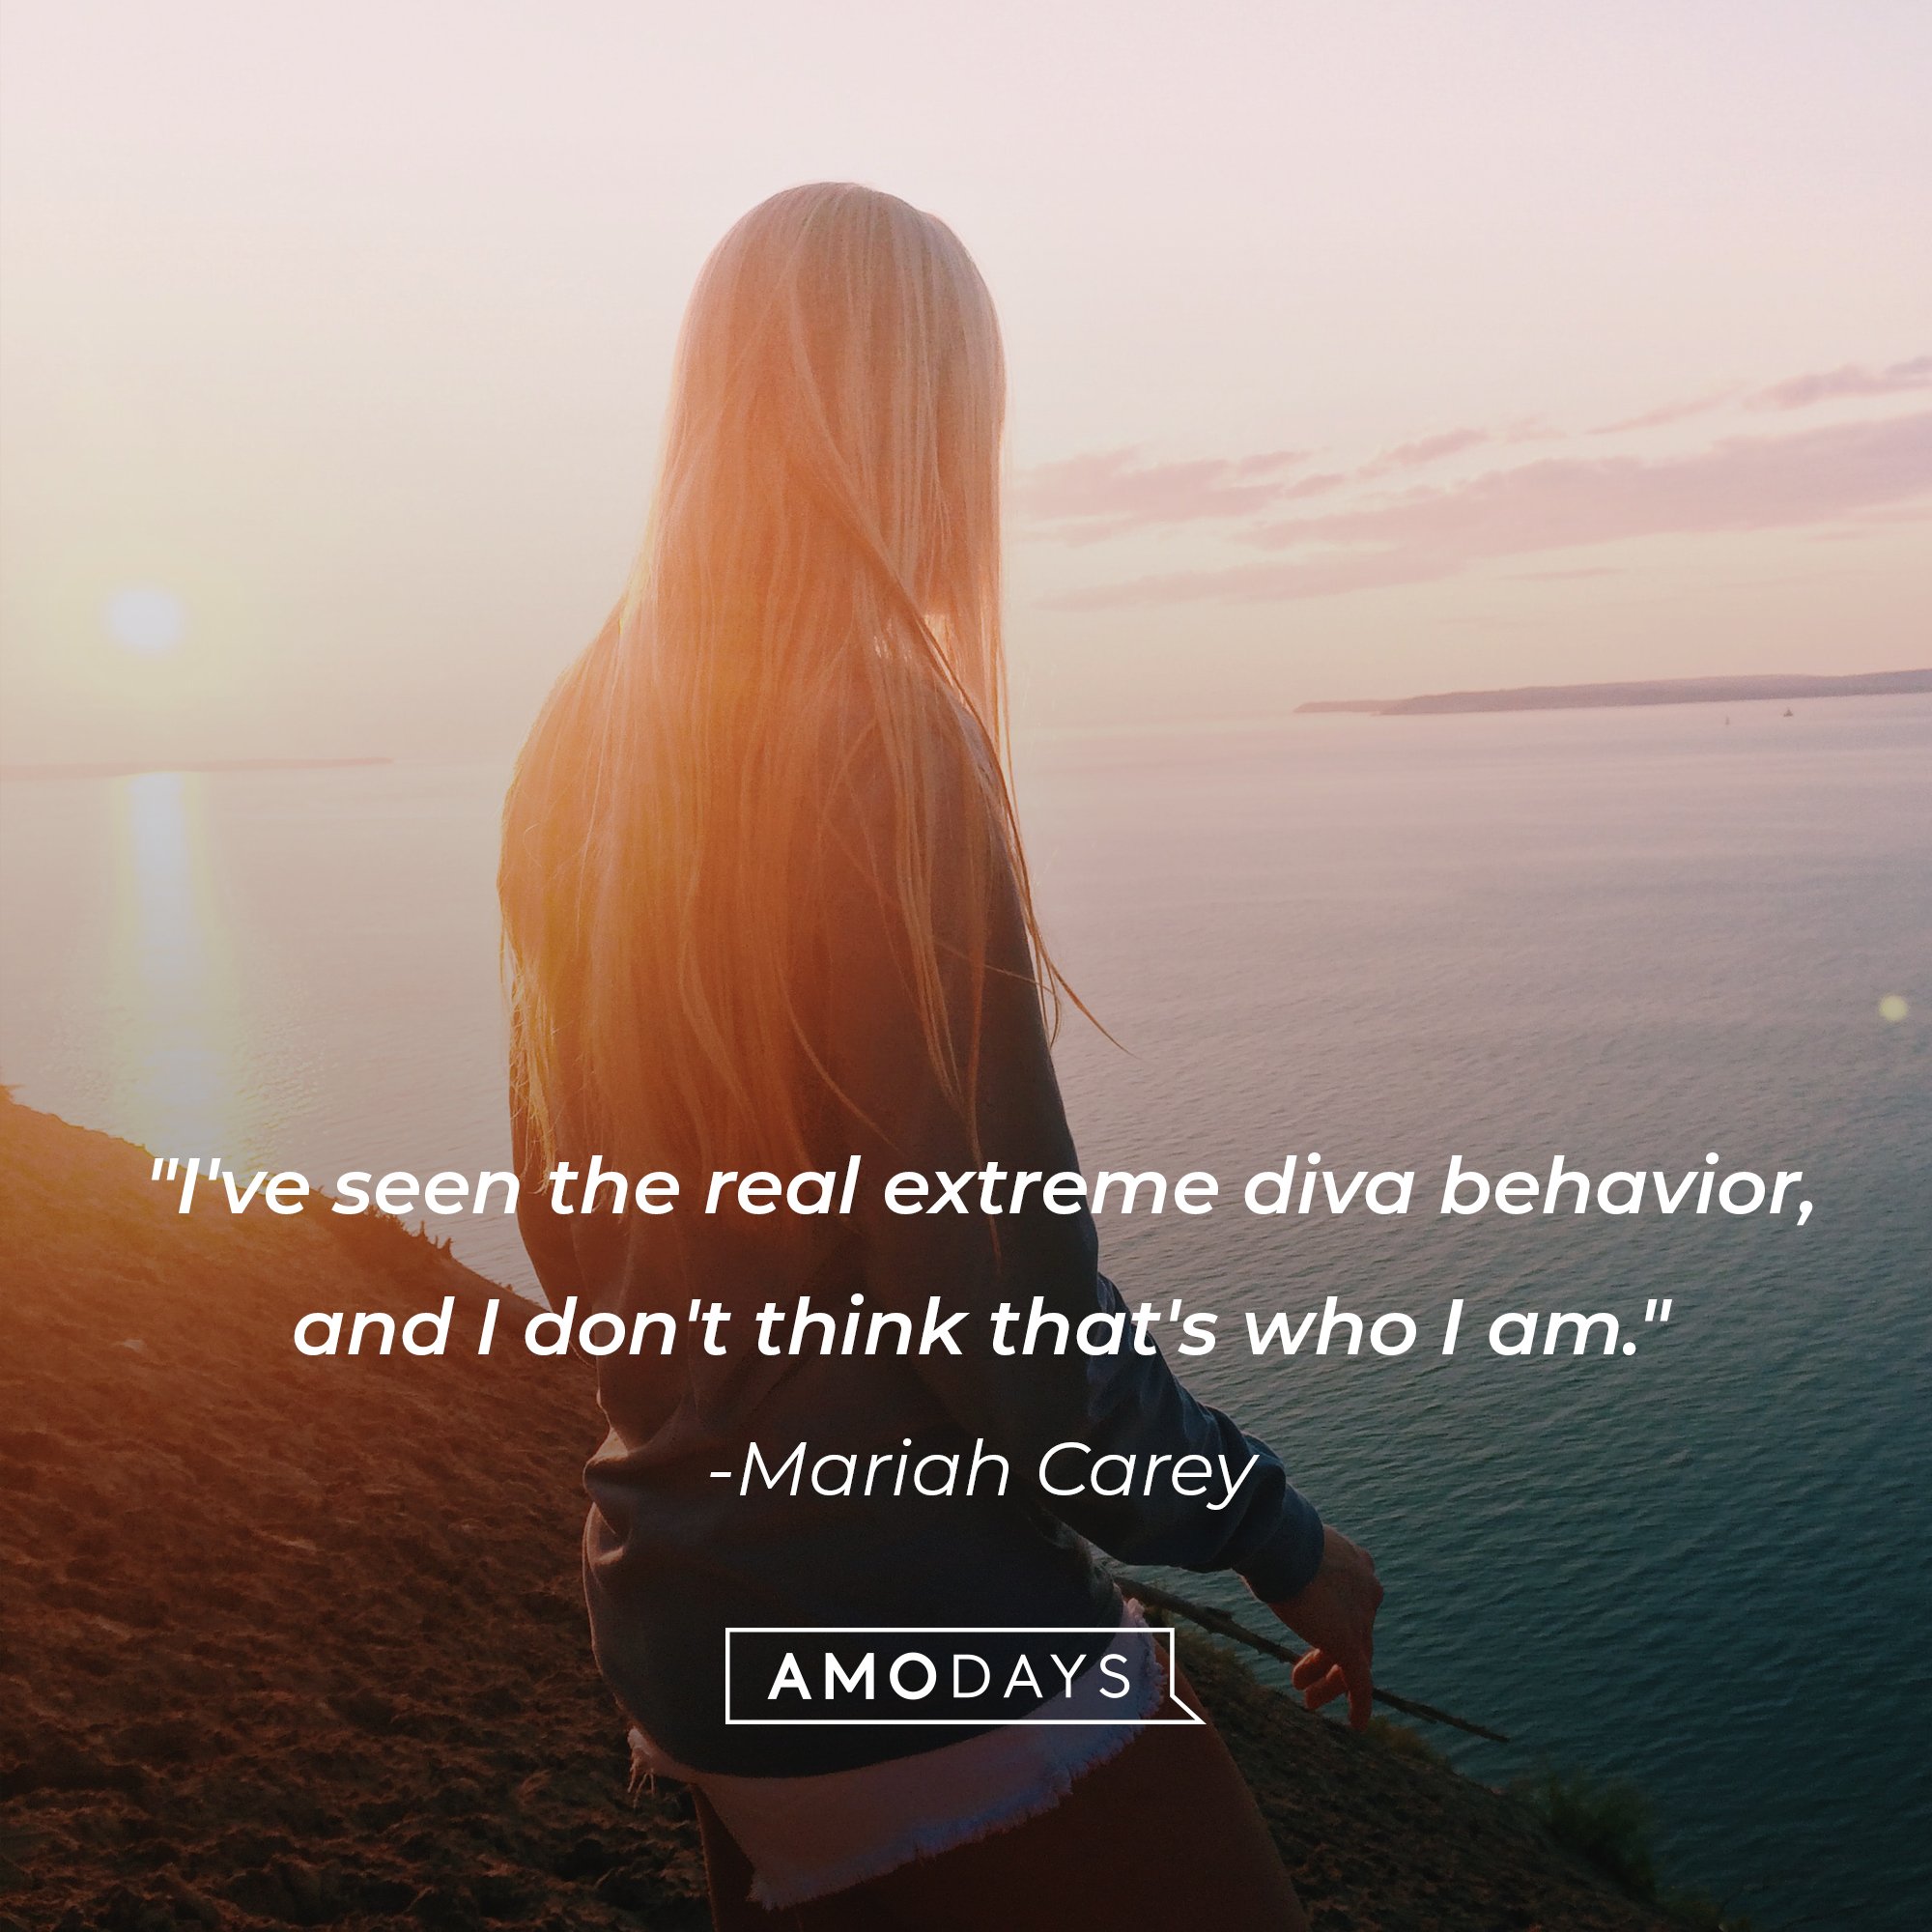 Mariah Carey’s quote: "I've seen the real extreme diva behavior, and I don't think that's who I am." | Image: AmoDays